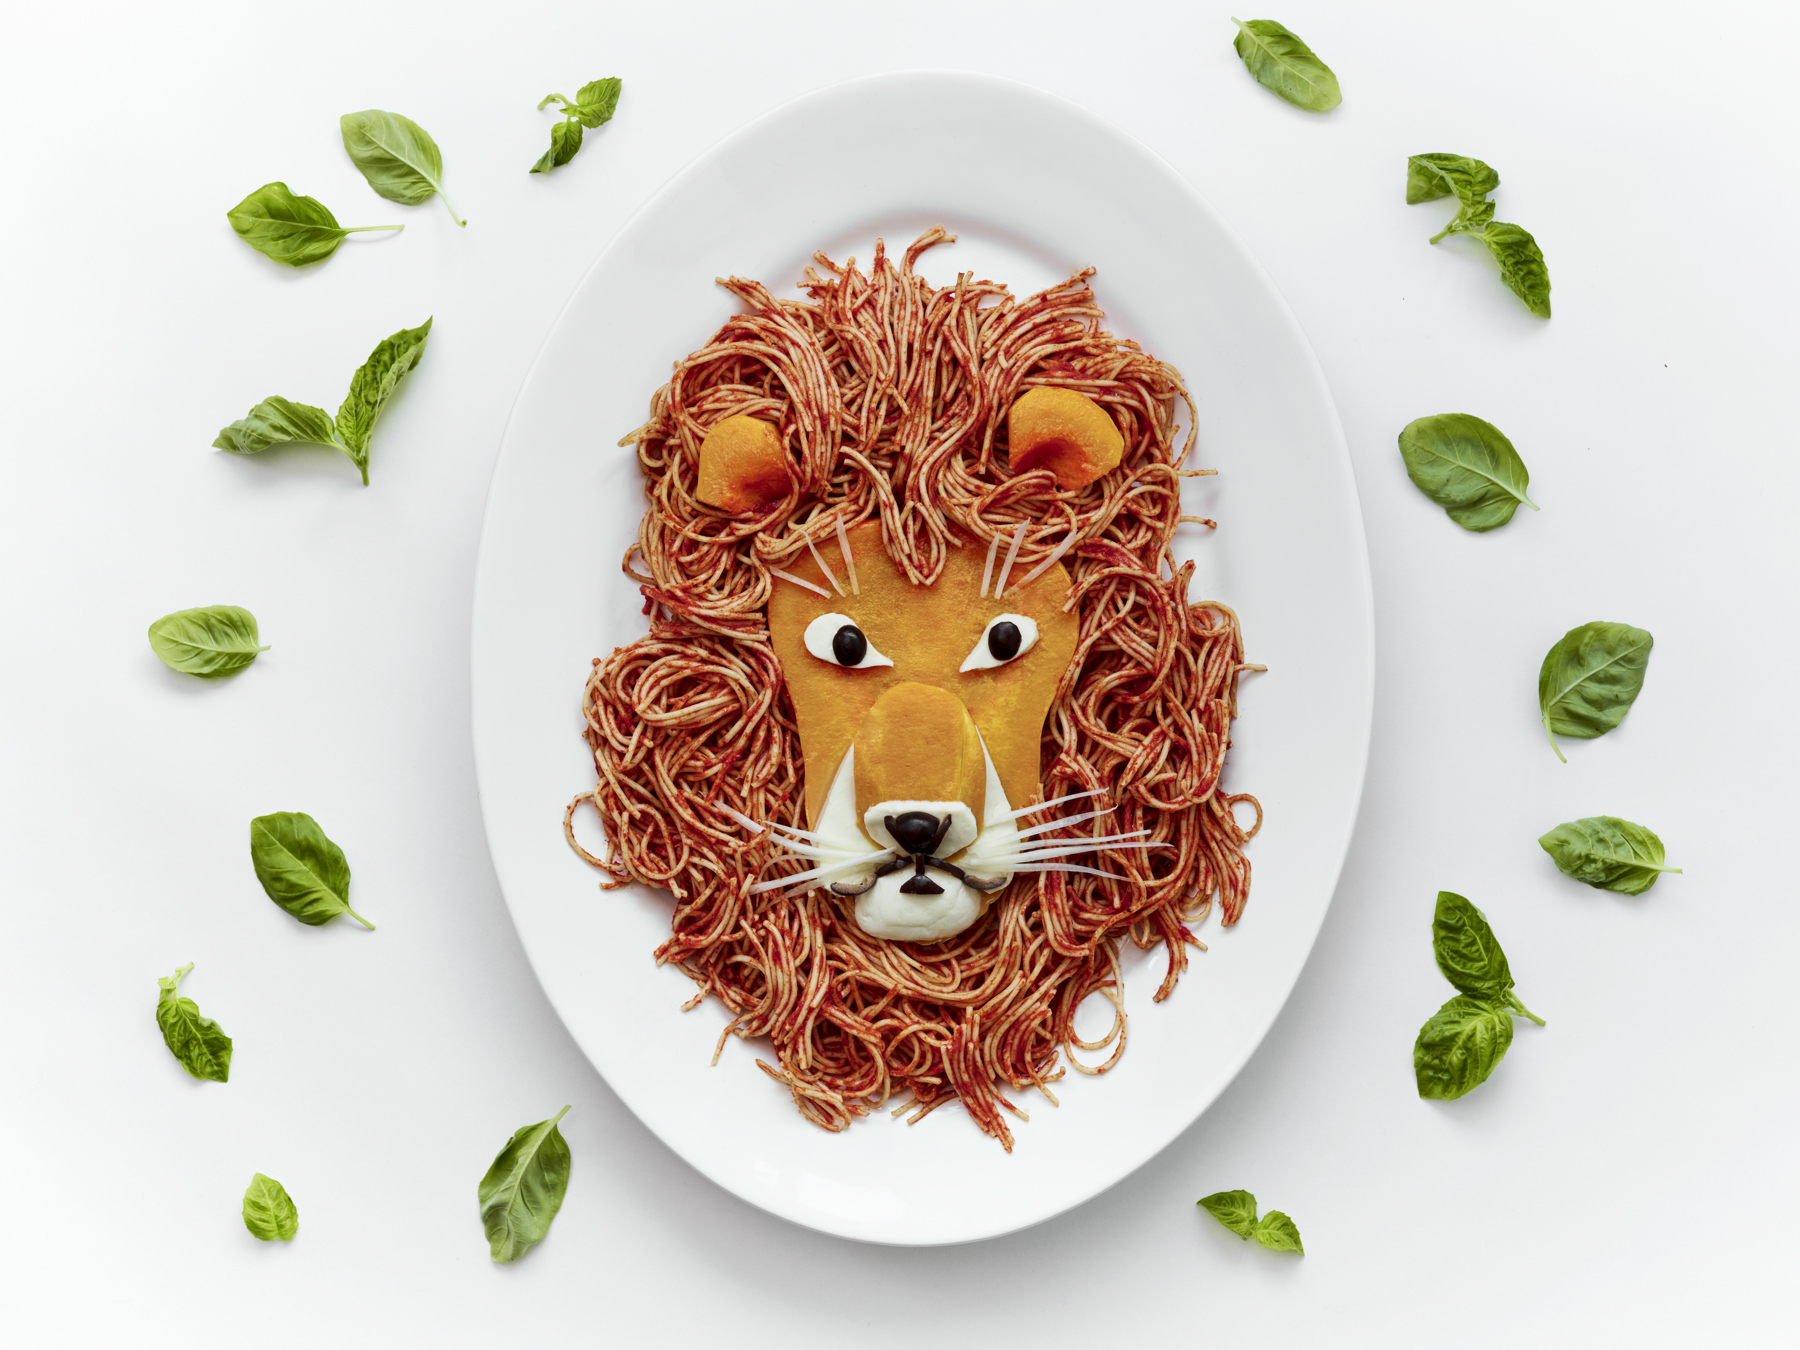 Example of Simba from The Lion King made from spaghetti and squash